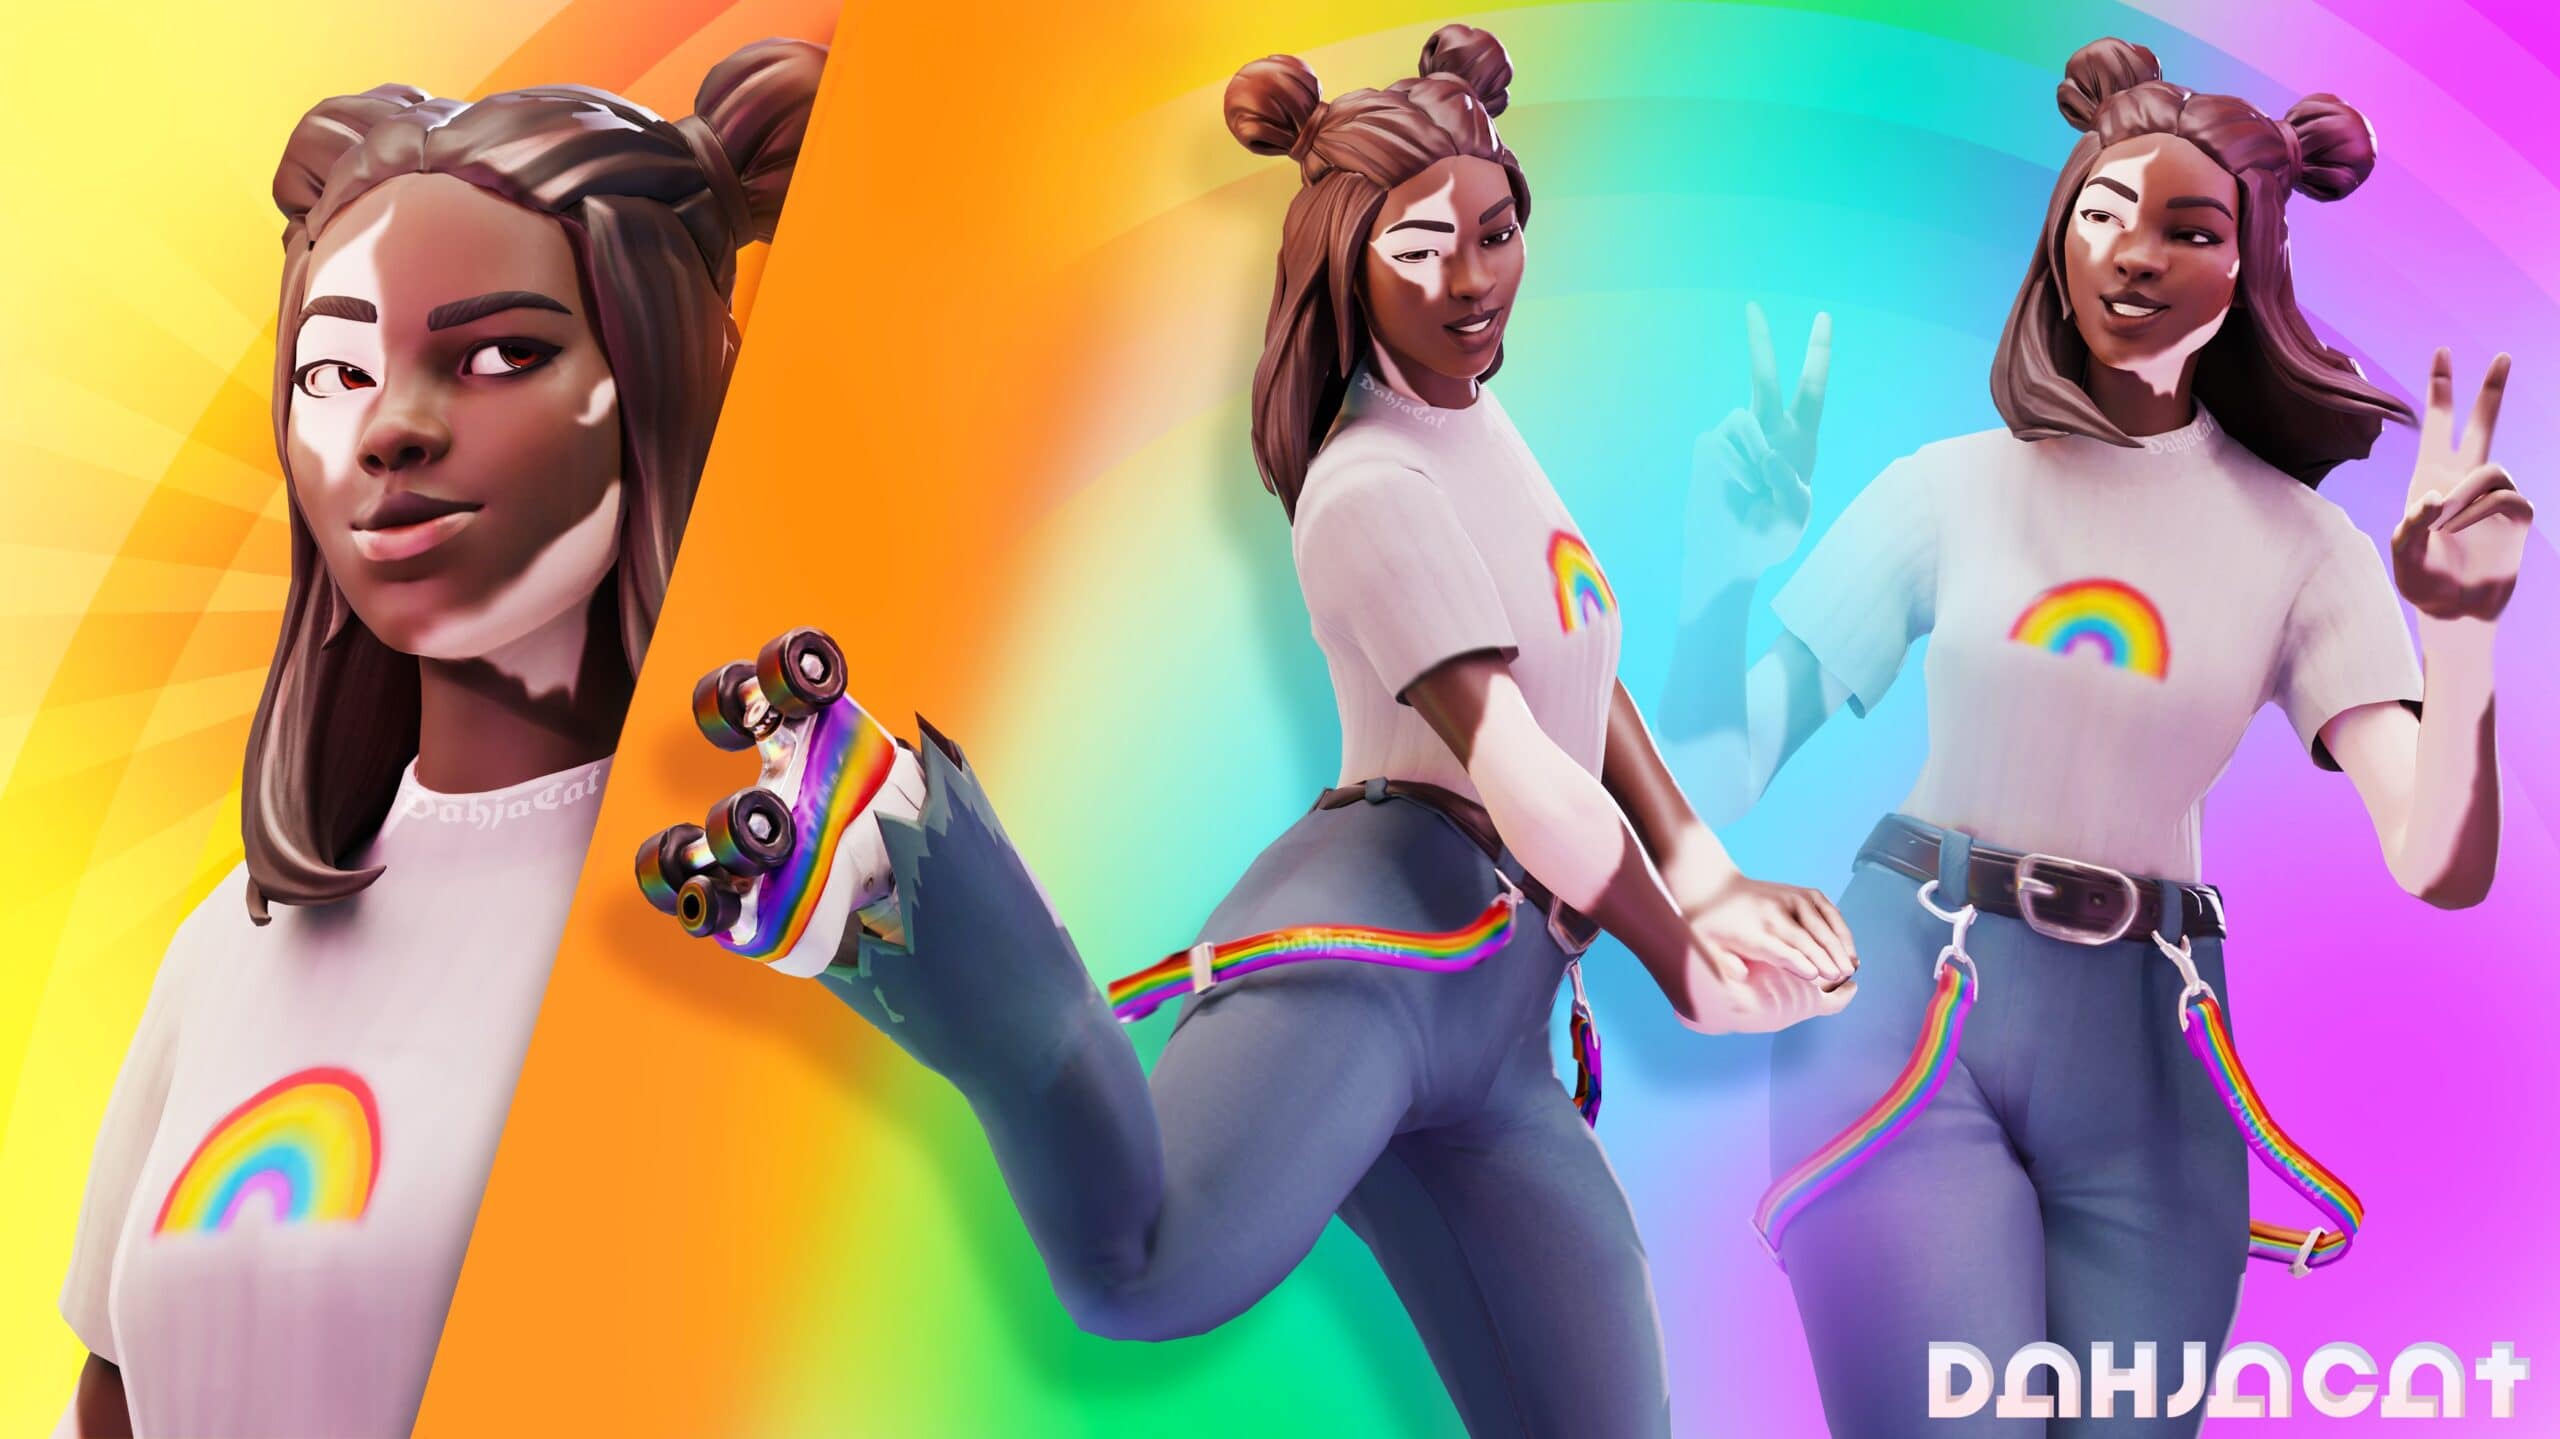 Are there any Lgbtq characters in Fortnite?